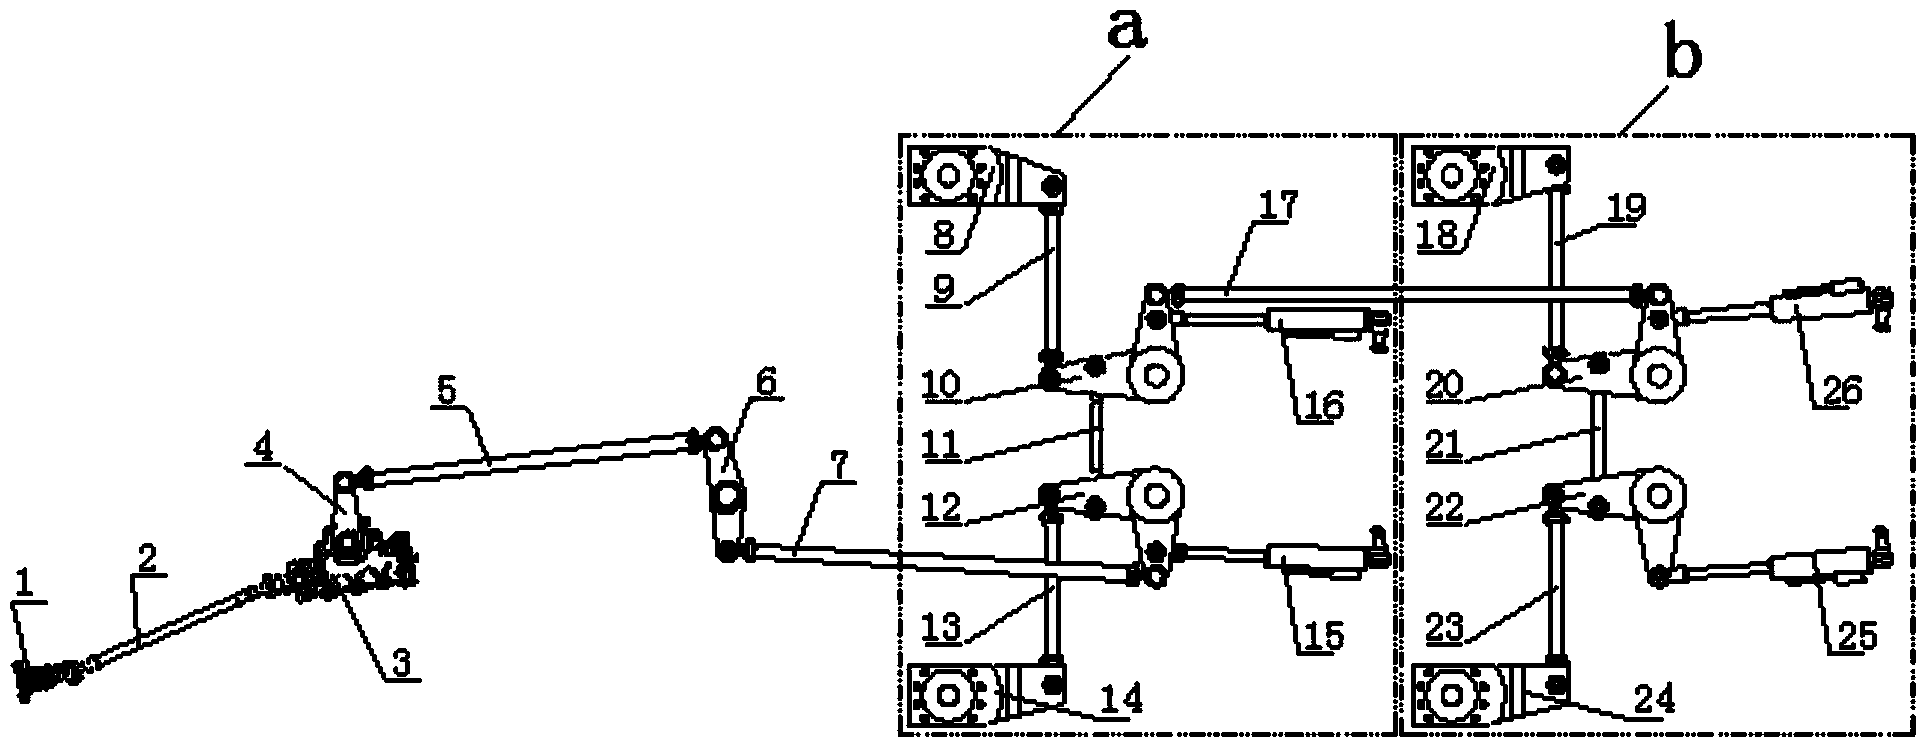 Steering system and independent suspension wheel type overload vehicle